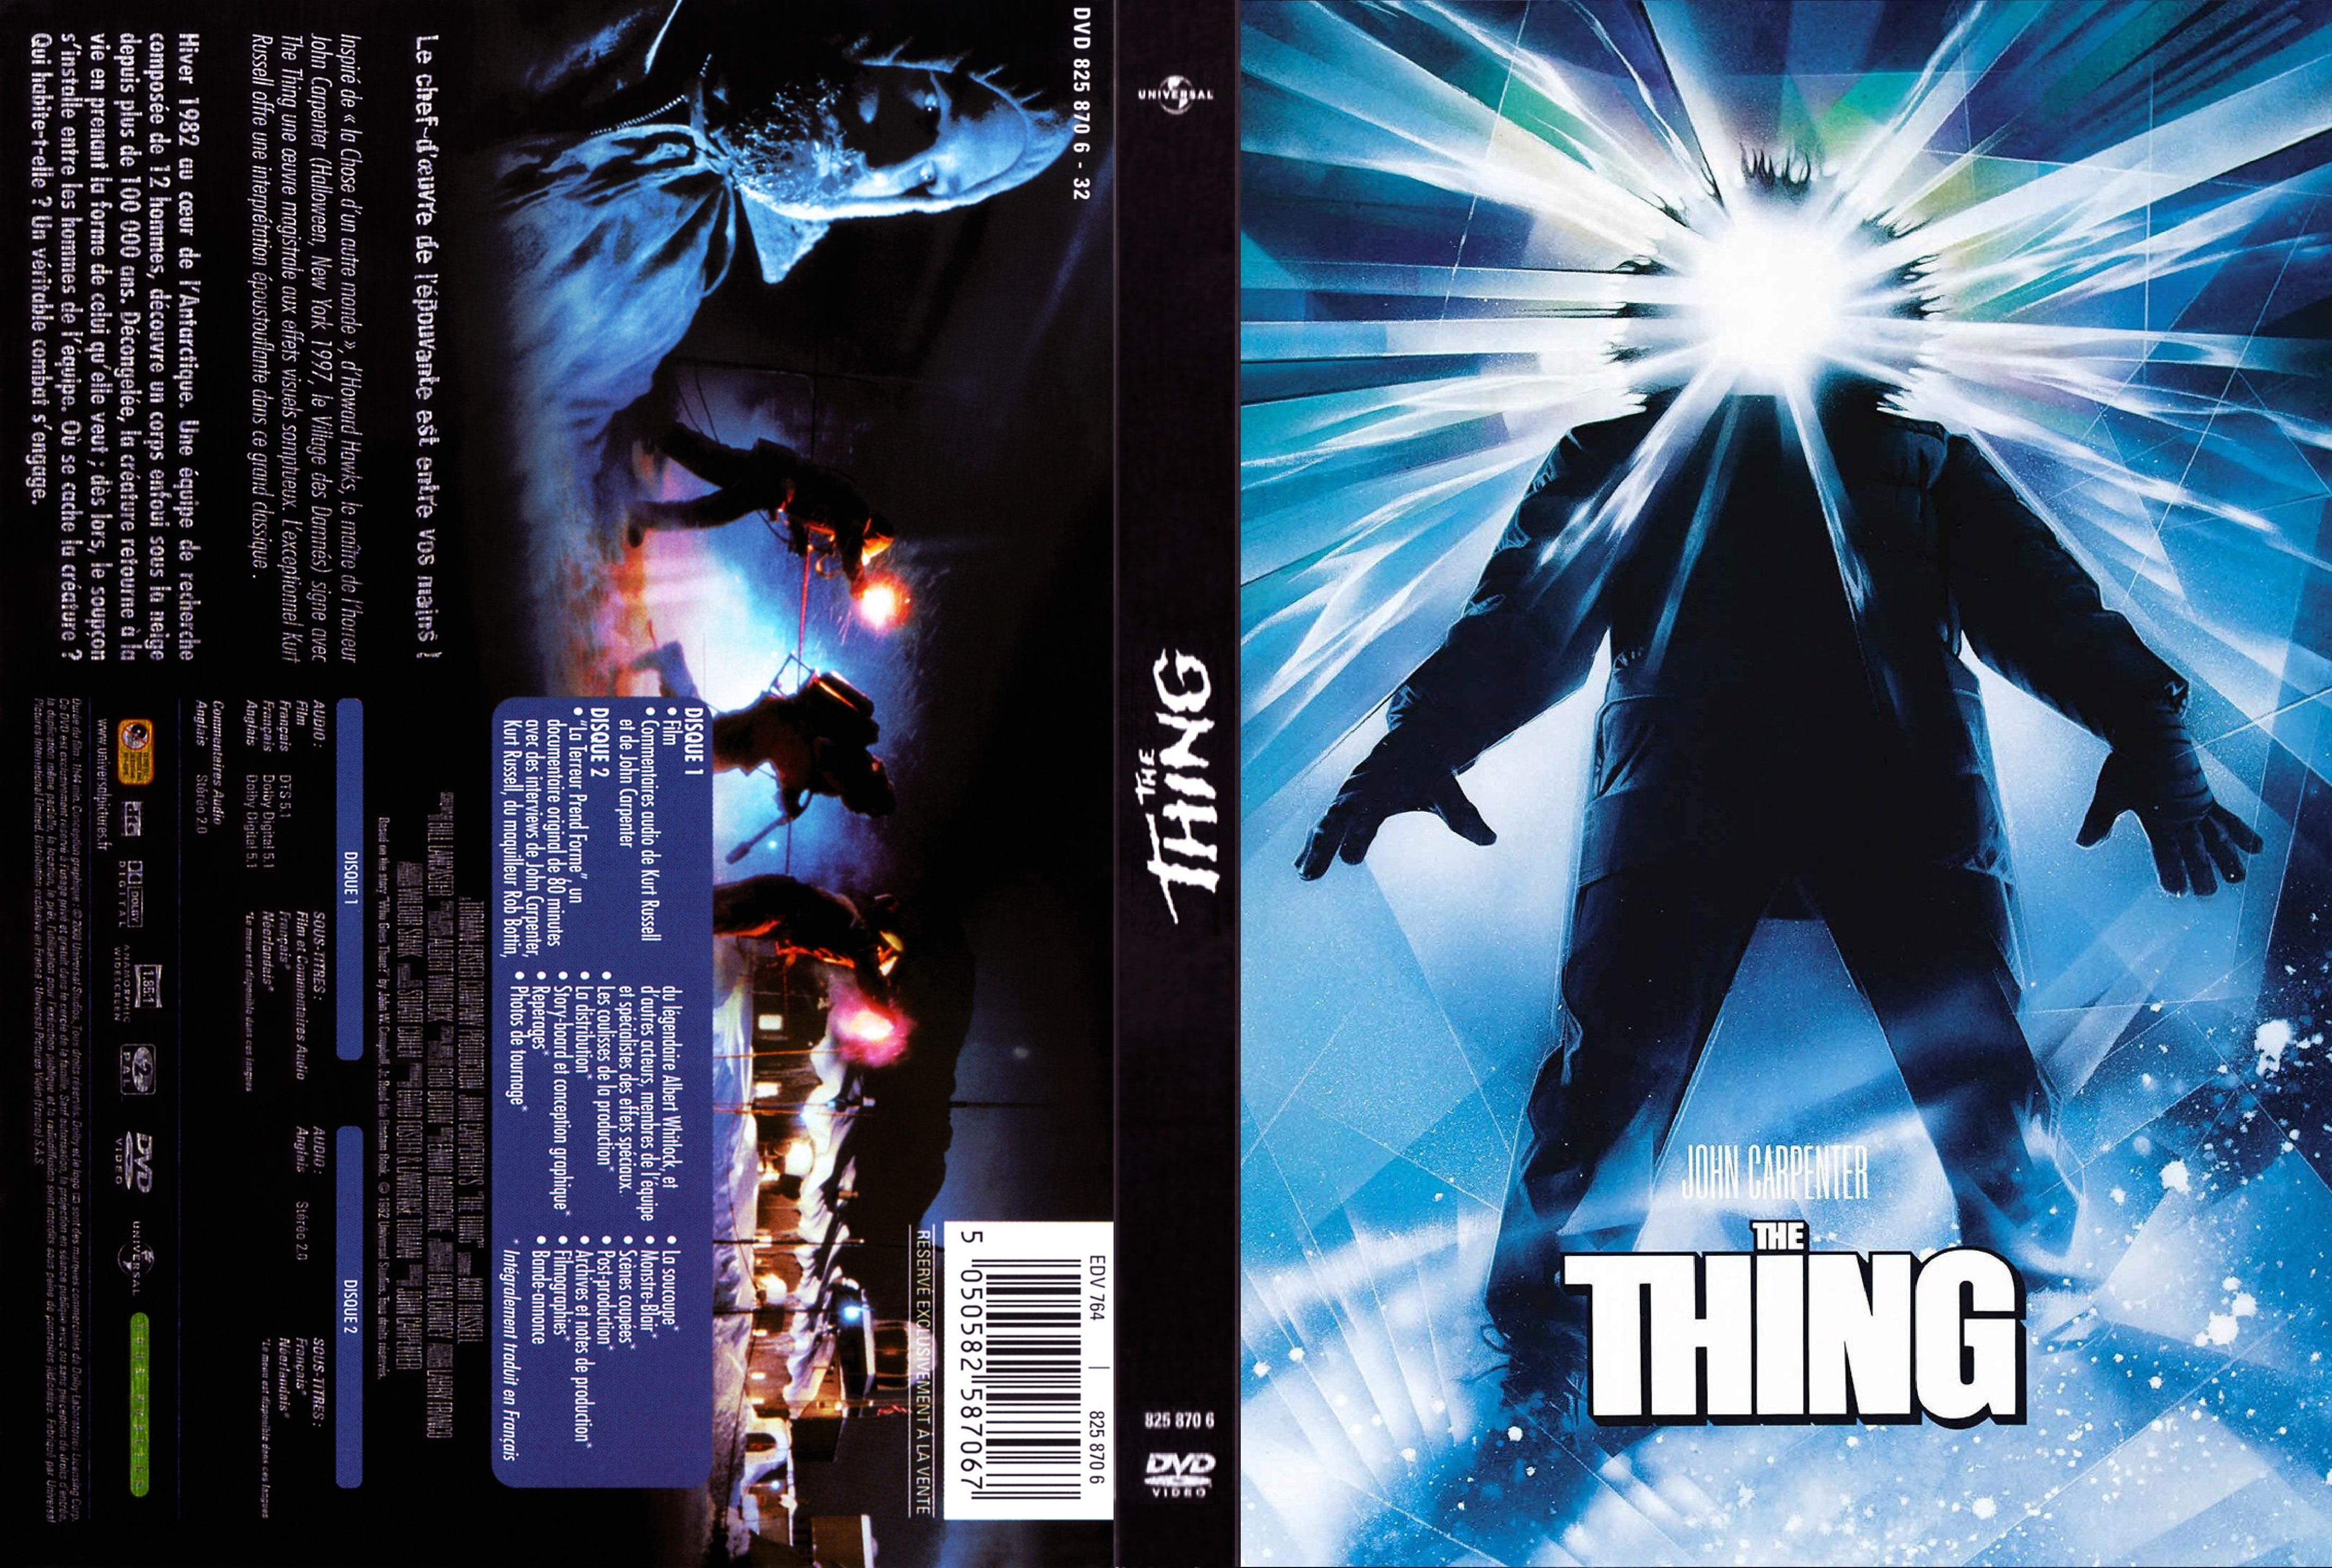 Jaquette DVD The Thing v6